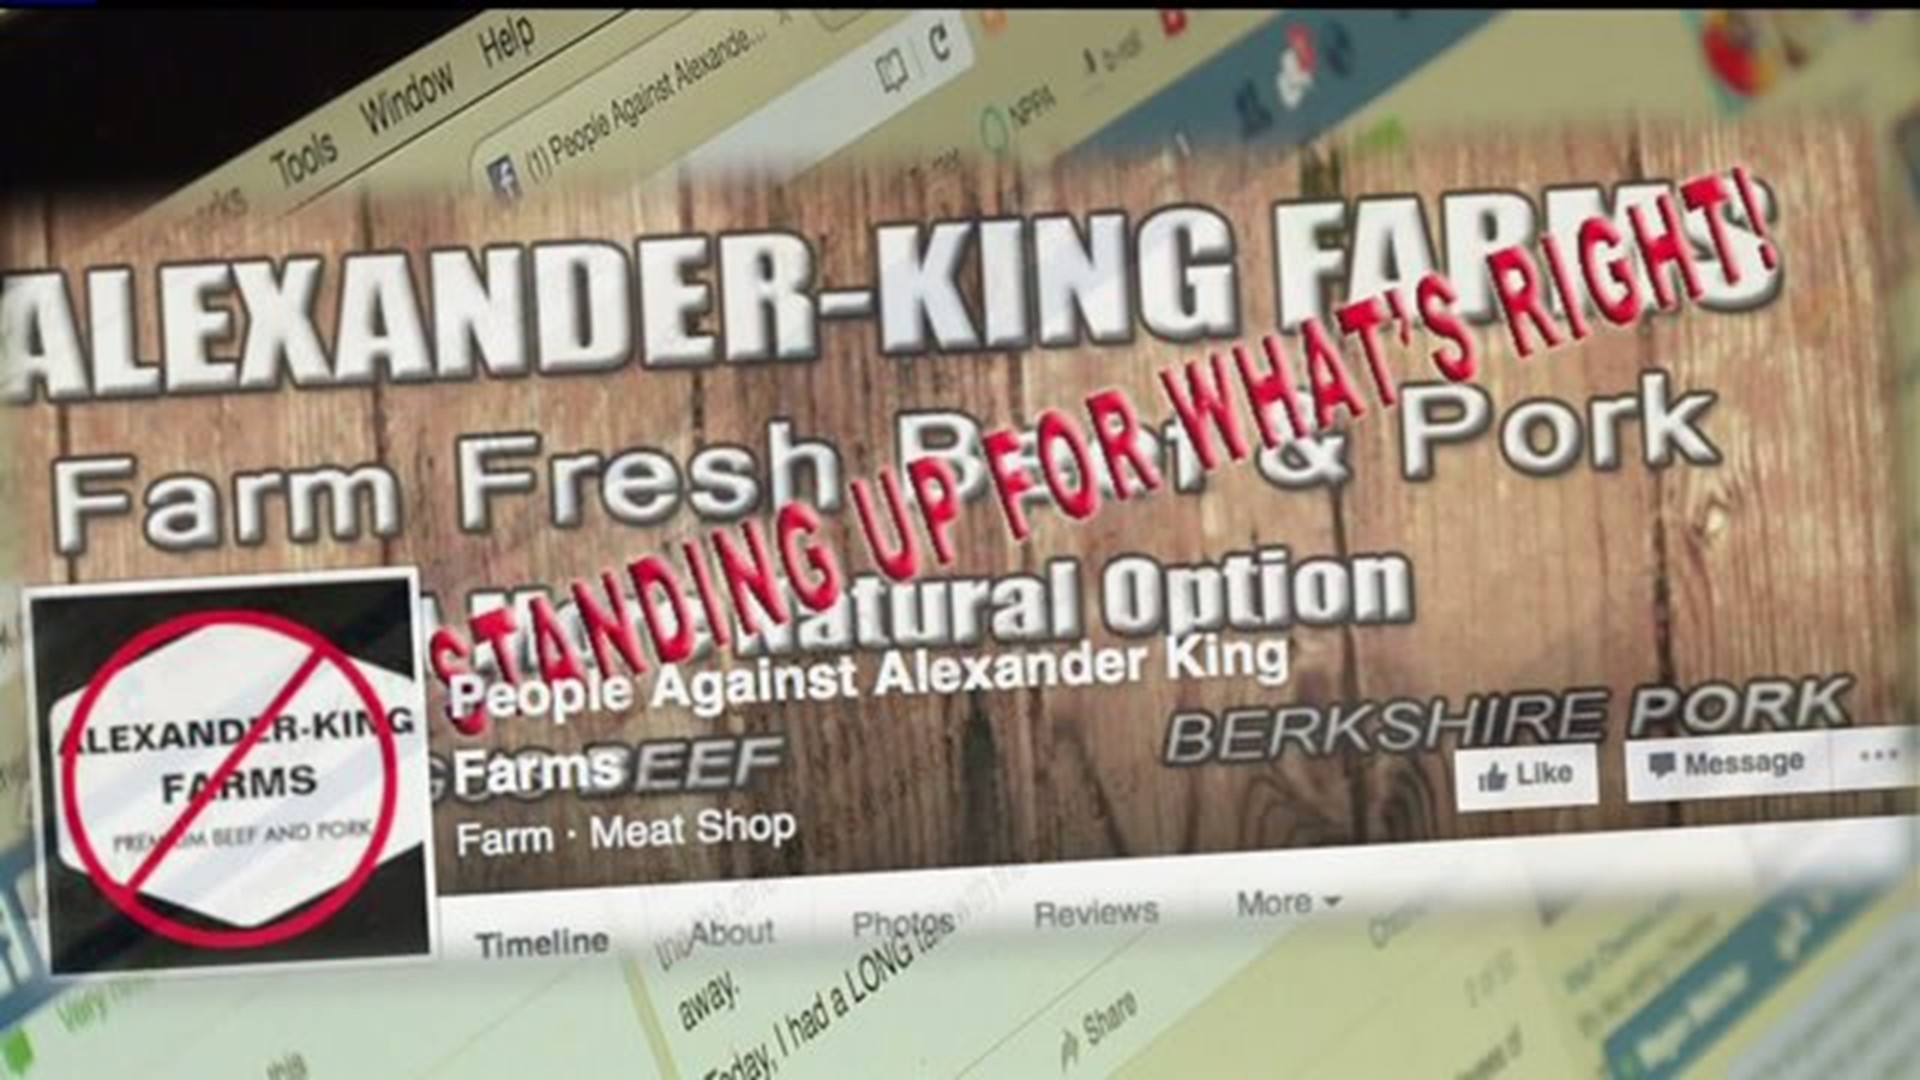 Coowner of Alexander King Farms claims bankruptcy